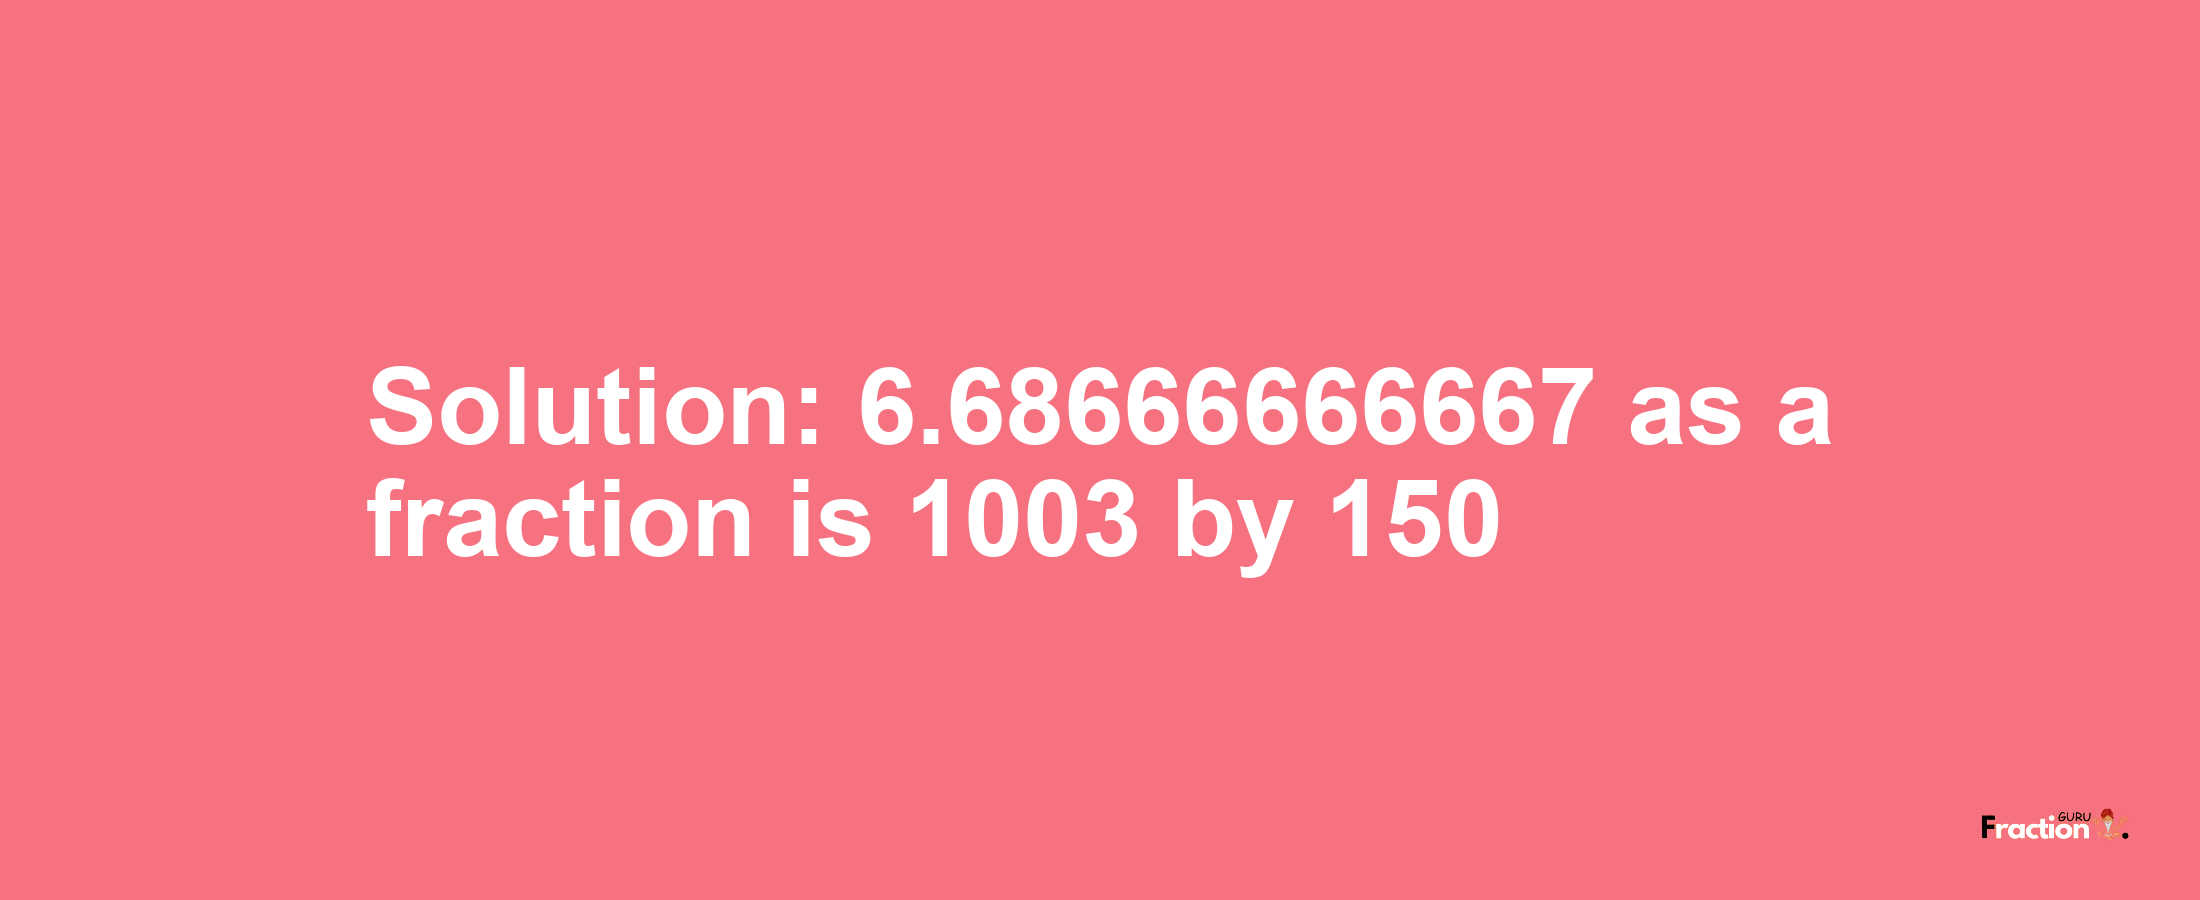 Solution:6.68666666667 as a fraction is 1003/150